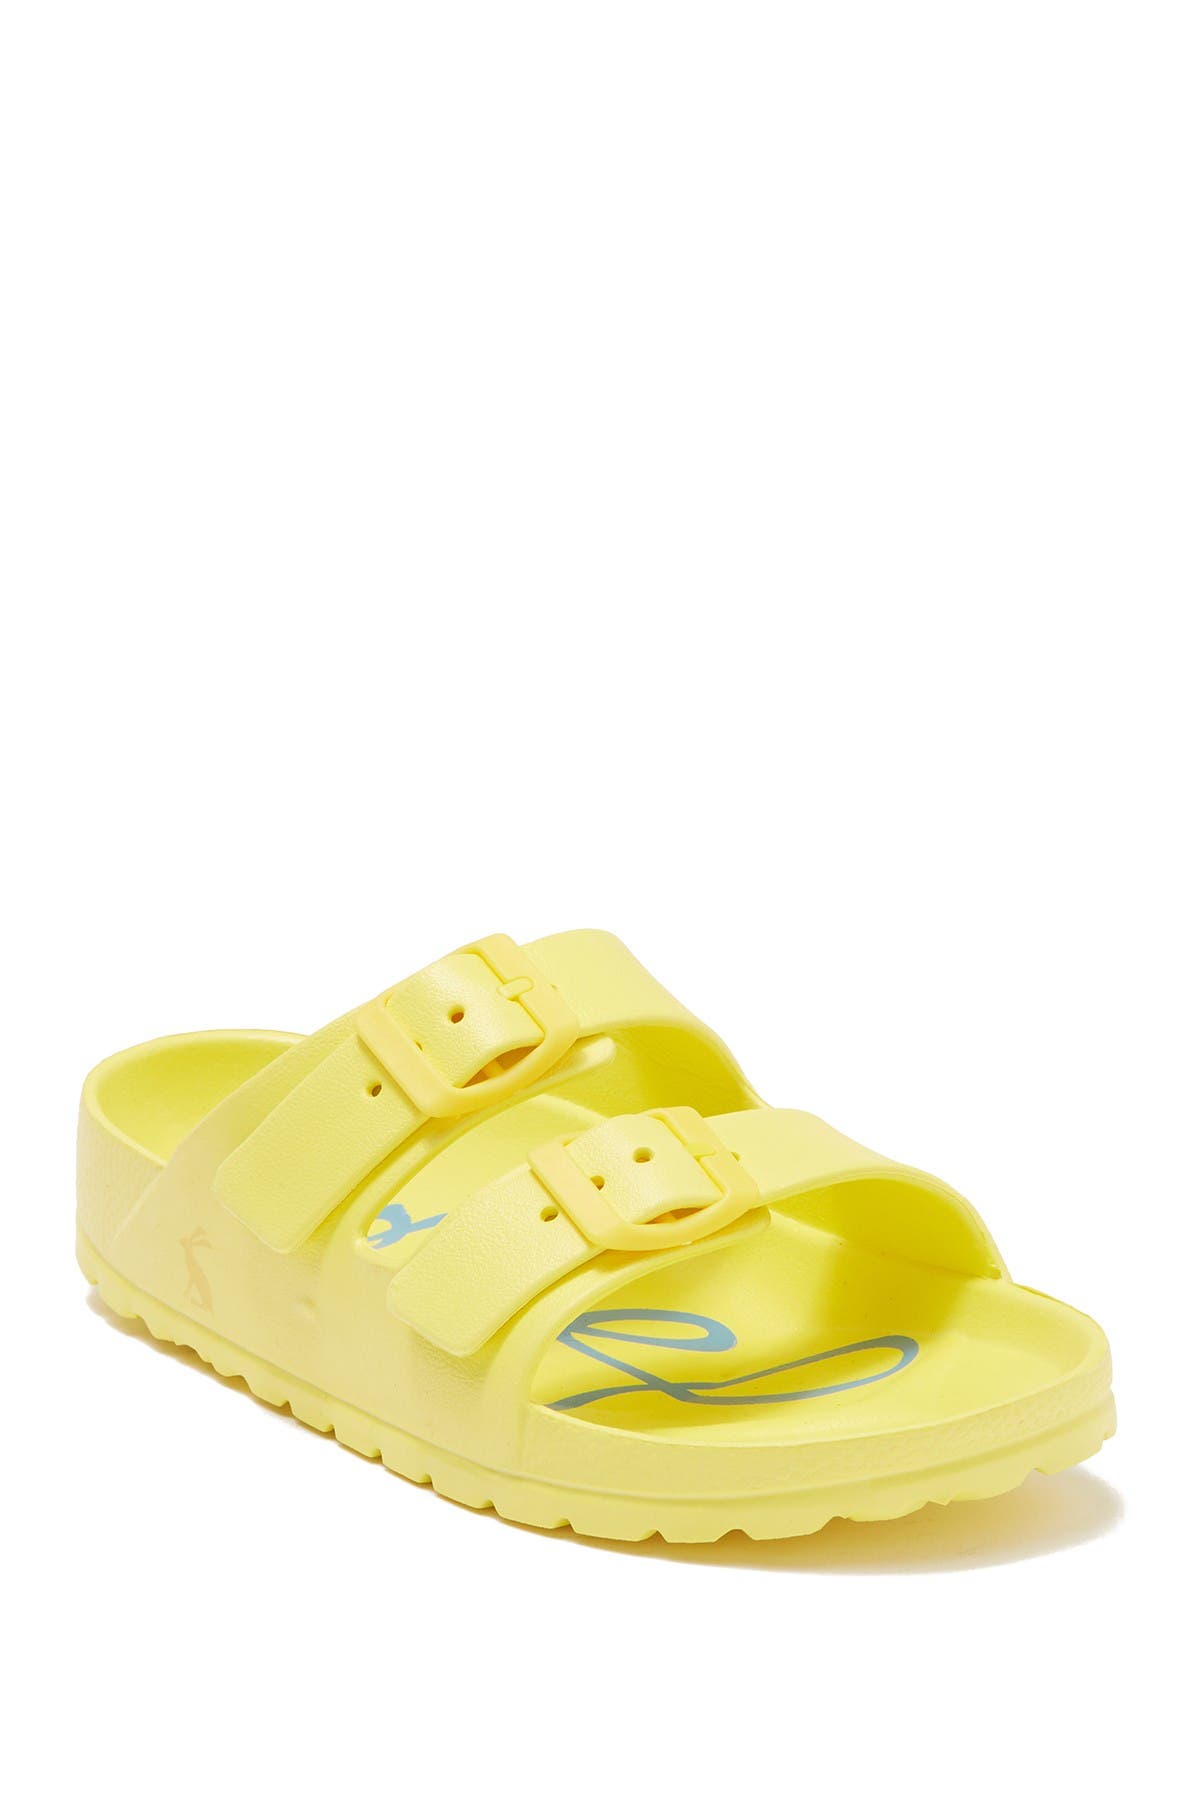 Joules Shore Buckle Slide Sandal In Yellow